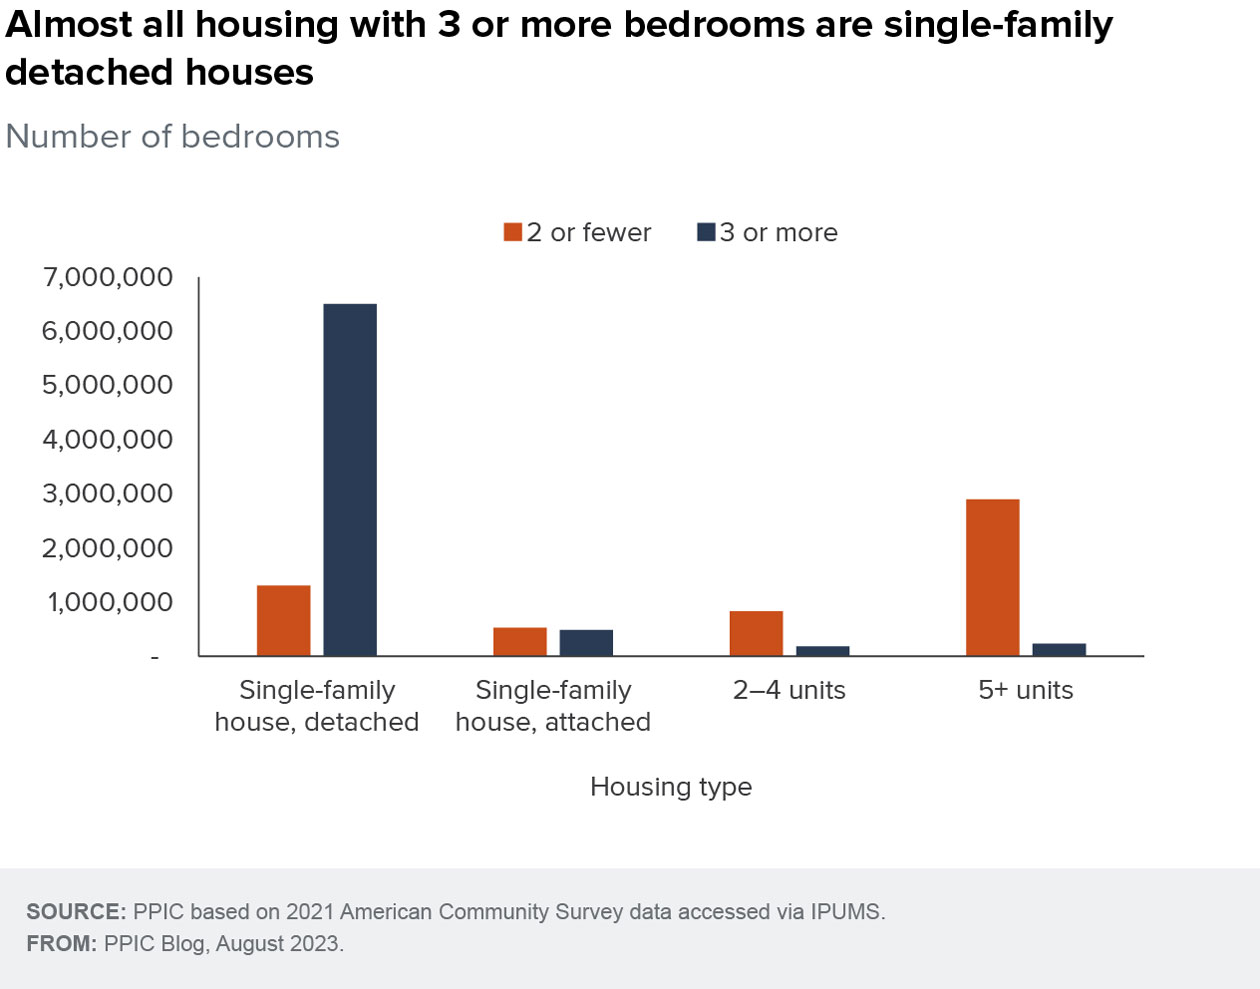 figure - Almost all housing with 3 or more bedrooms are single-family detached houses